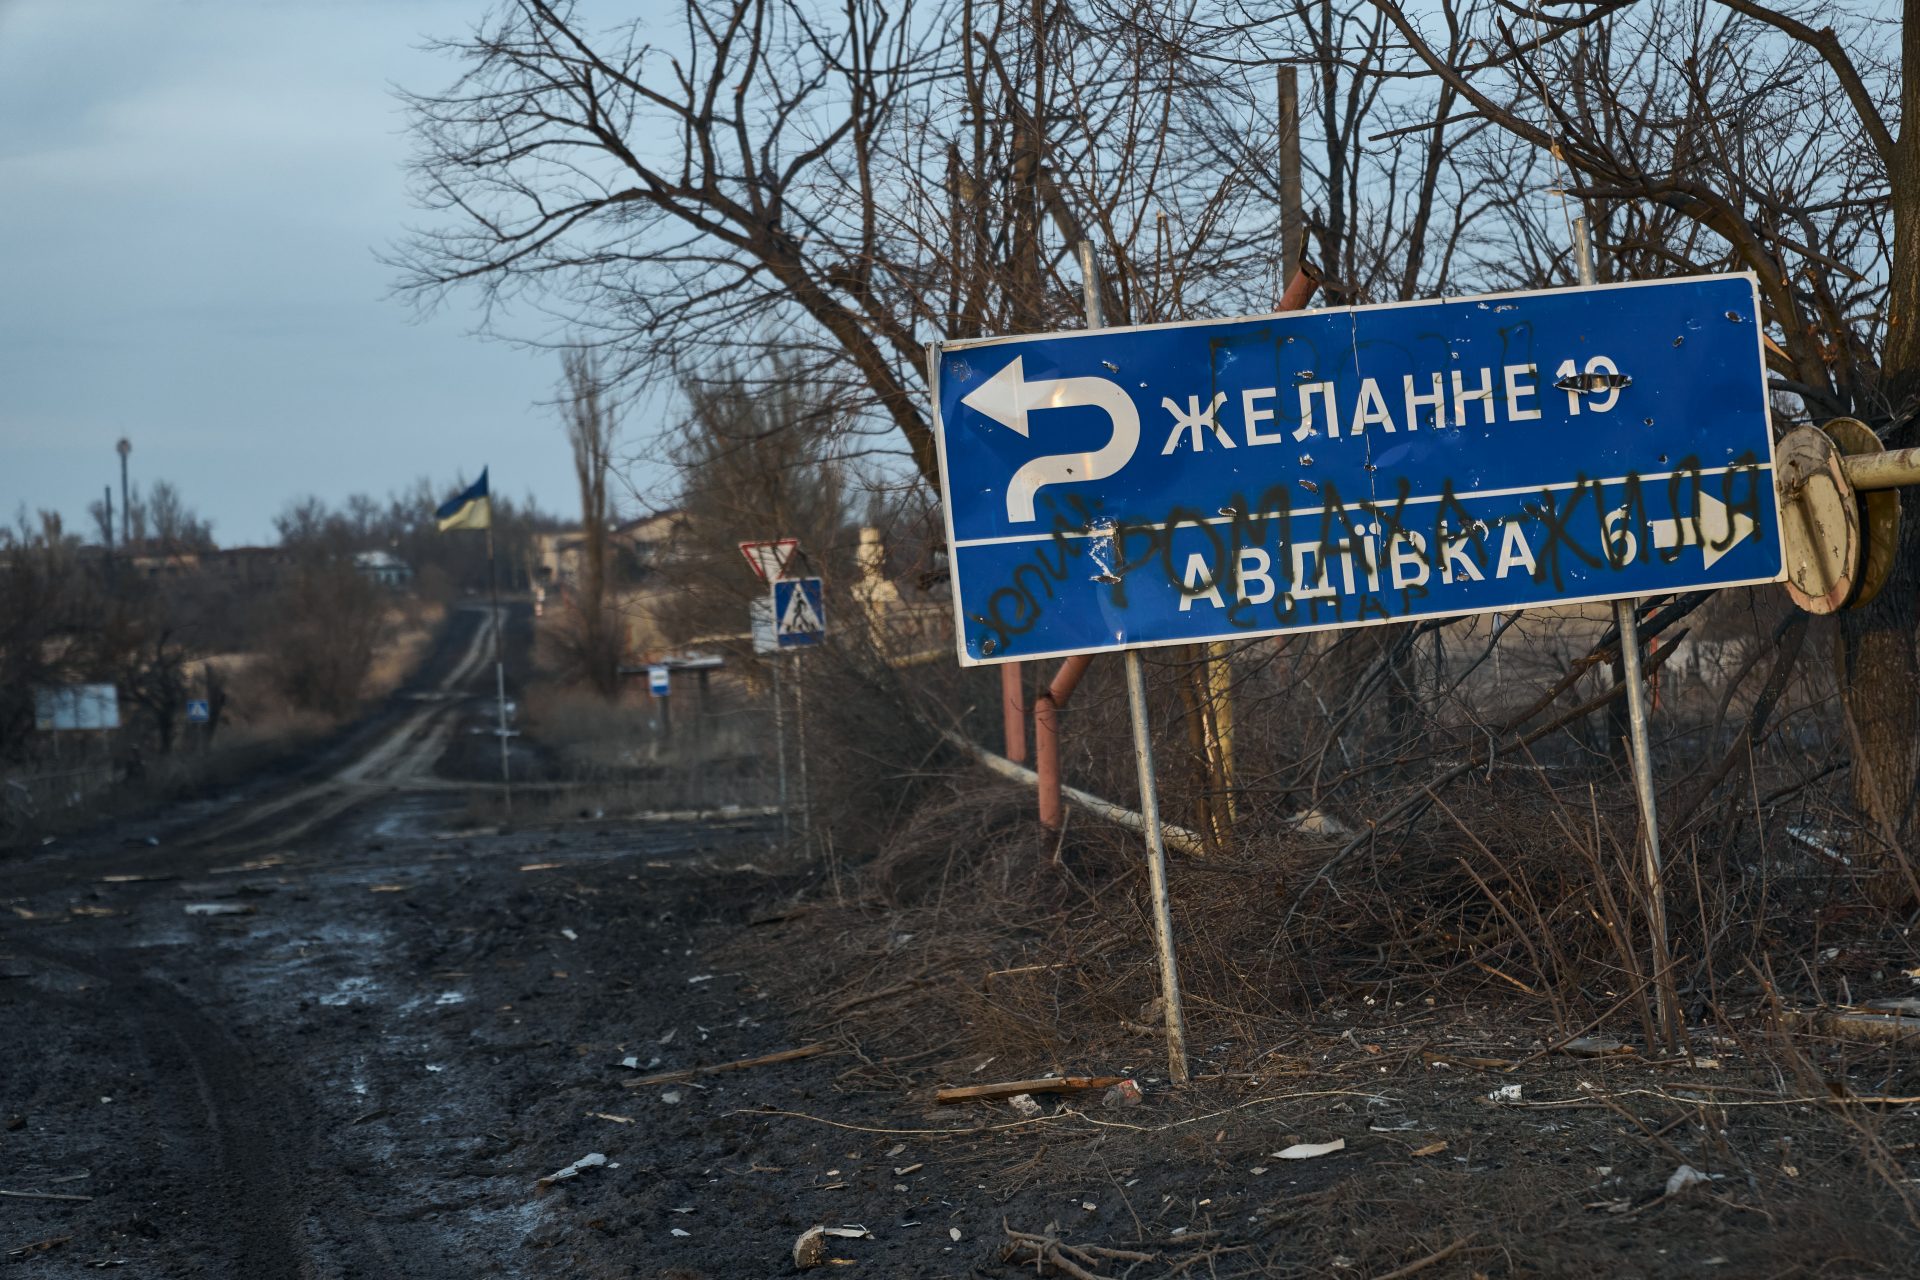 Russia paid a shockingly high price to capture Avdiivka